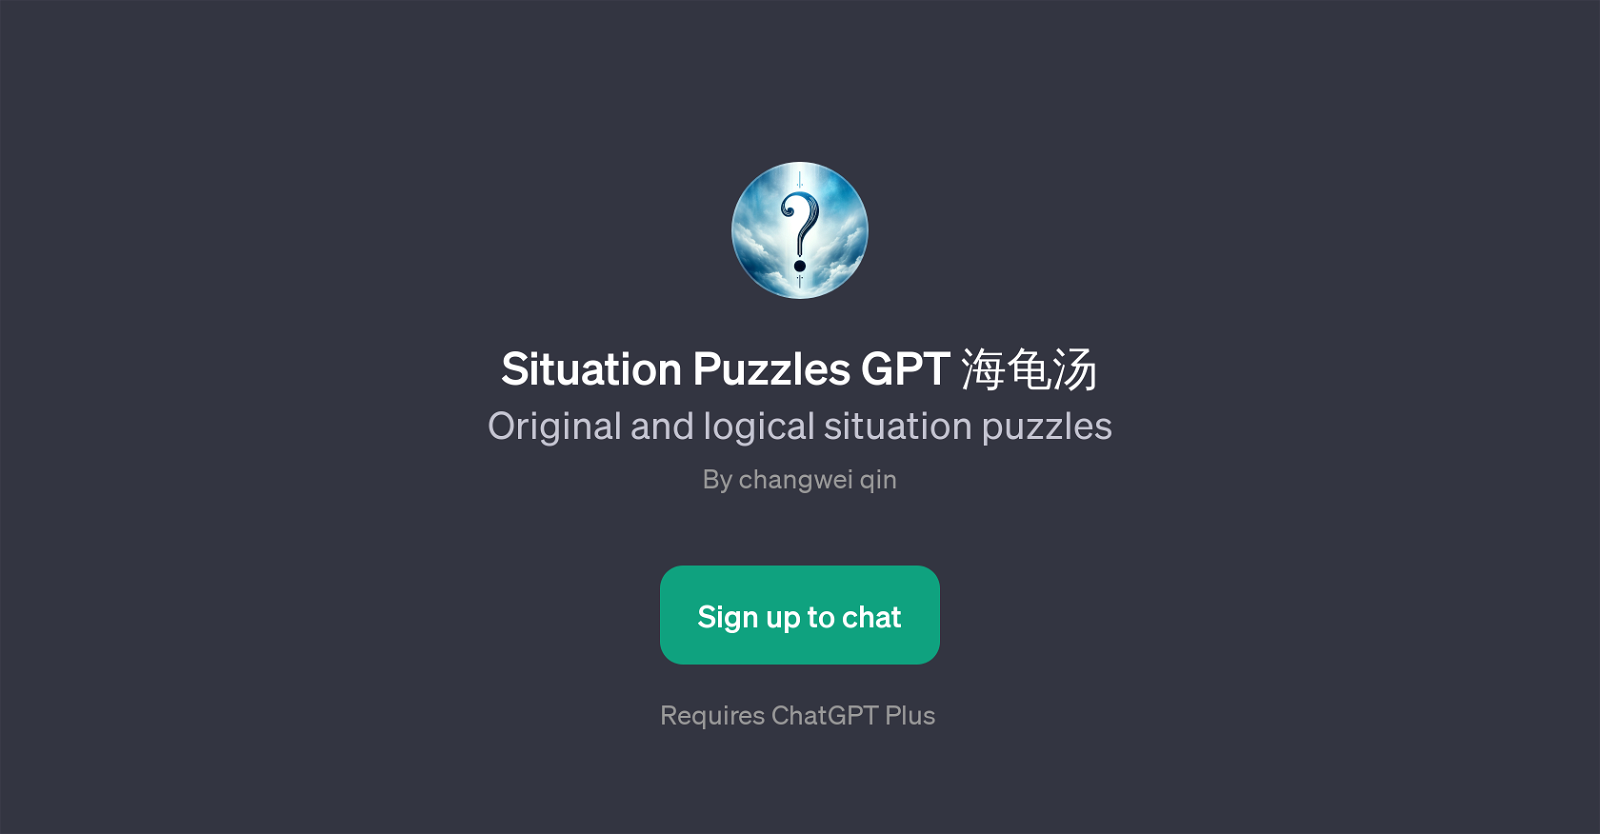 Situation Puzzles GPT website